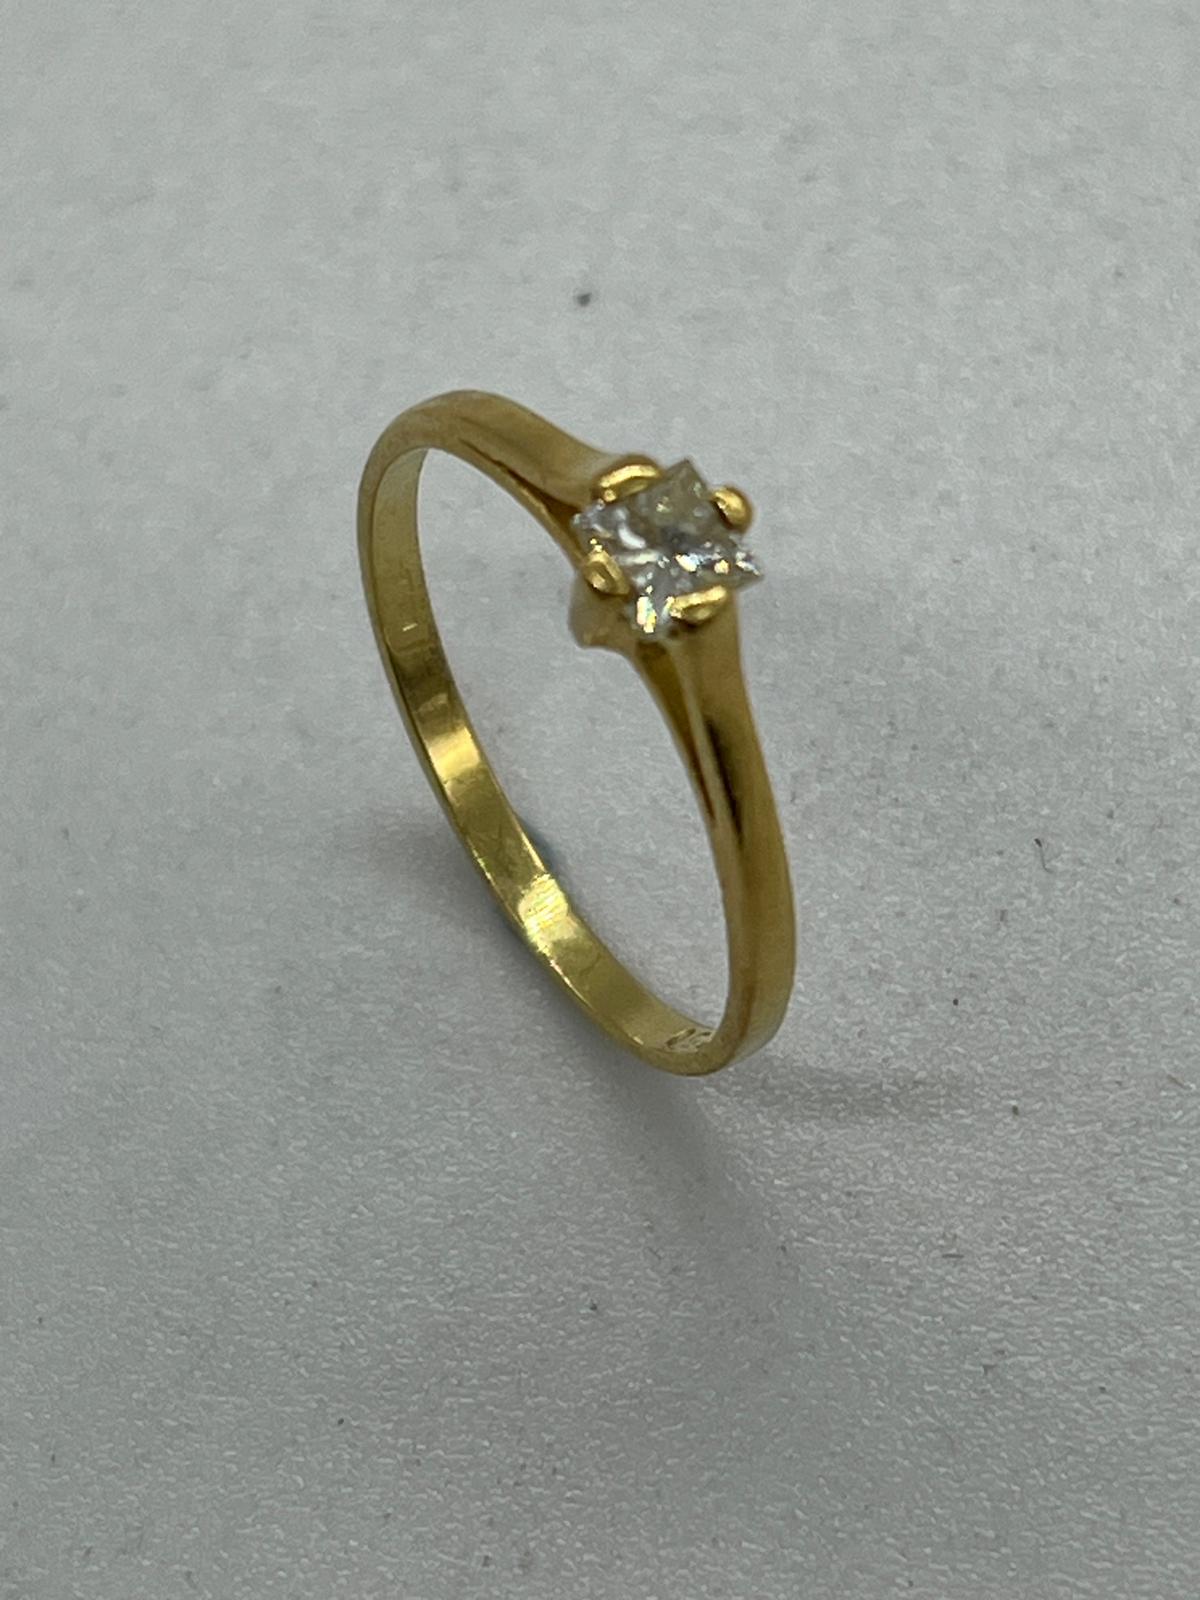 An 18ct diamond ring, yellow gold marked 750 (Approximate Total Weight 2g) Size N - Image 3 of 7